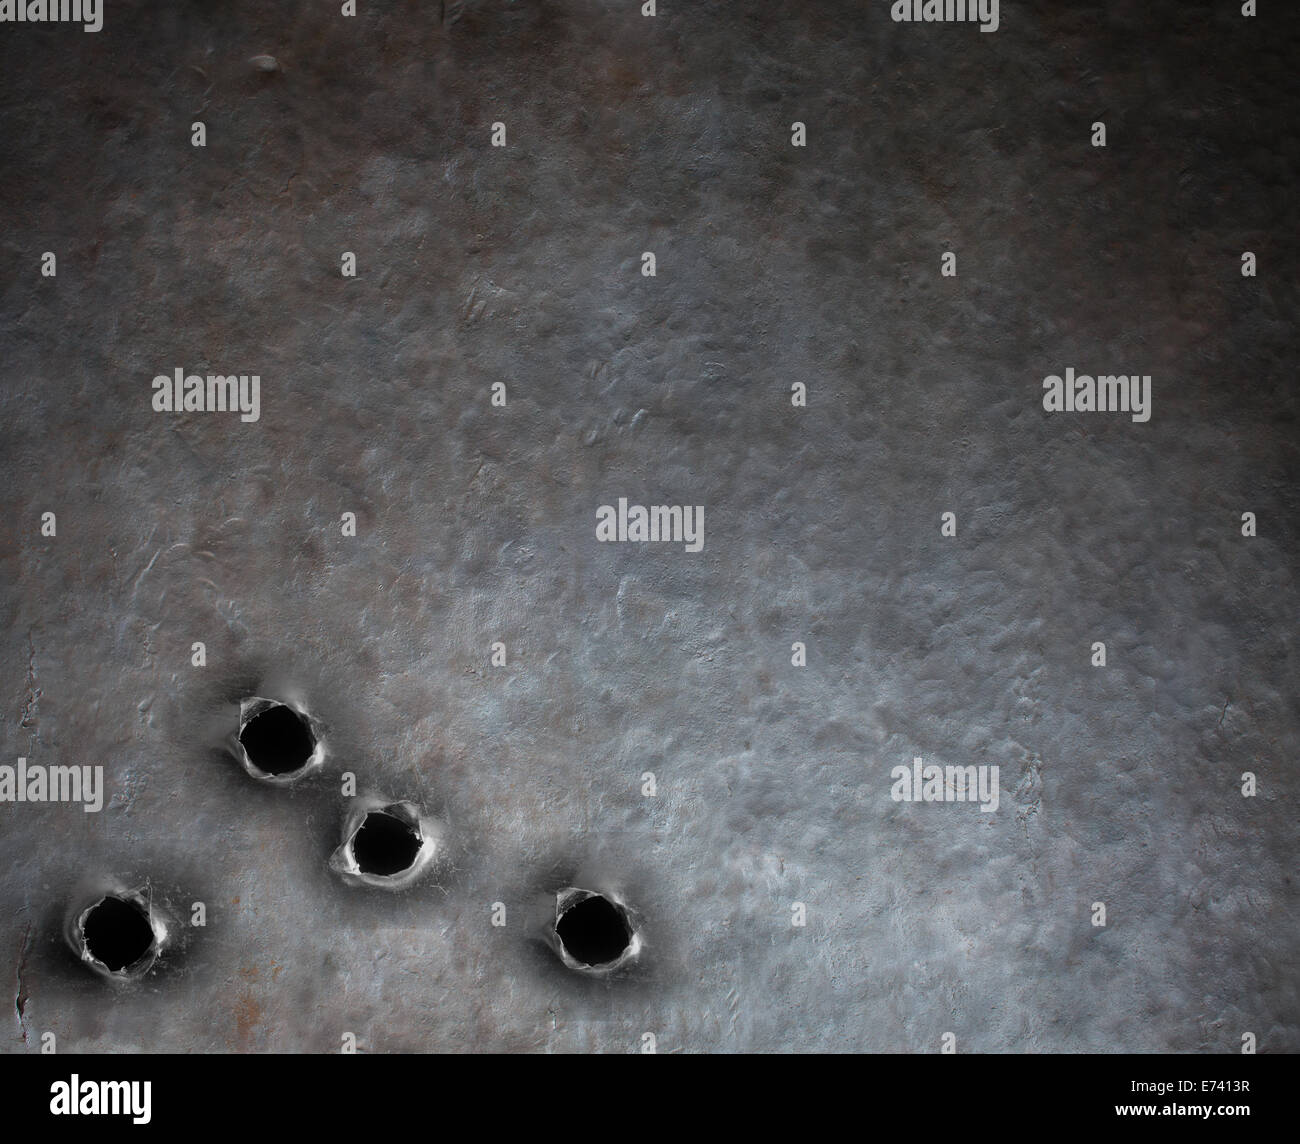 armor metal background with bullet holes Stock Photo